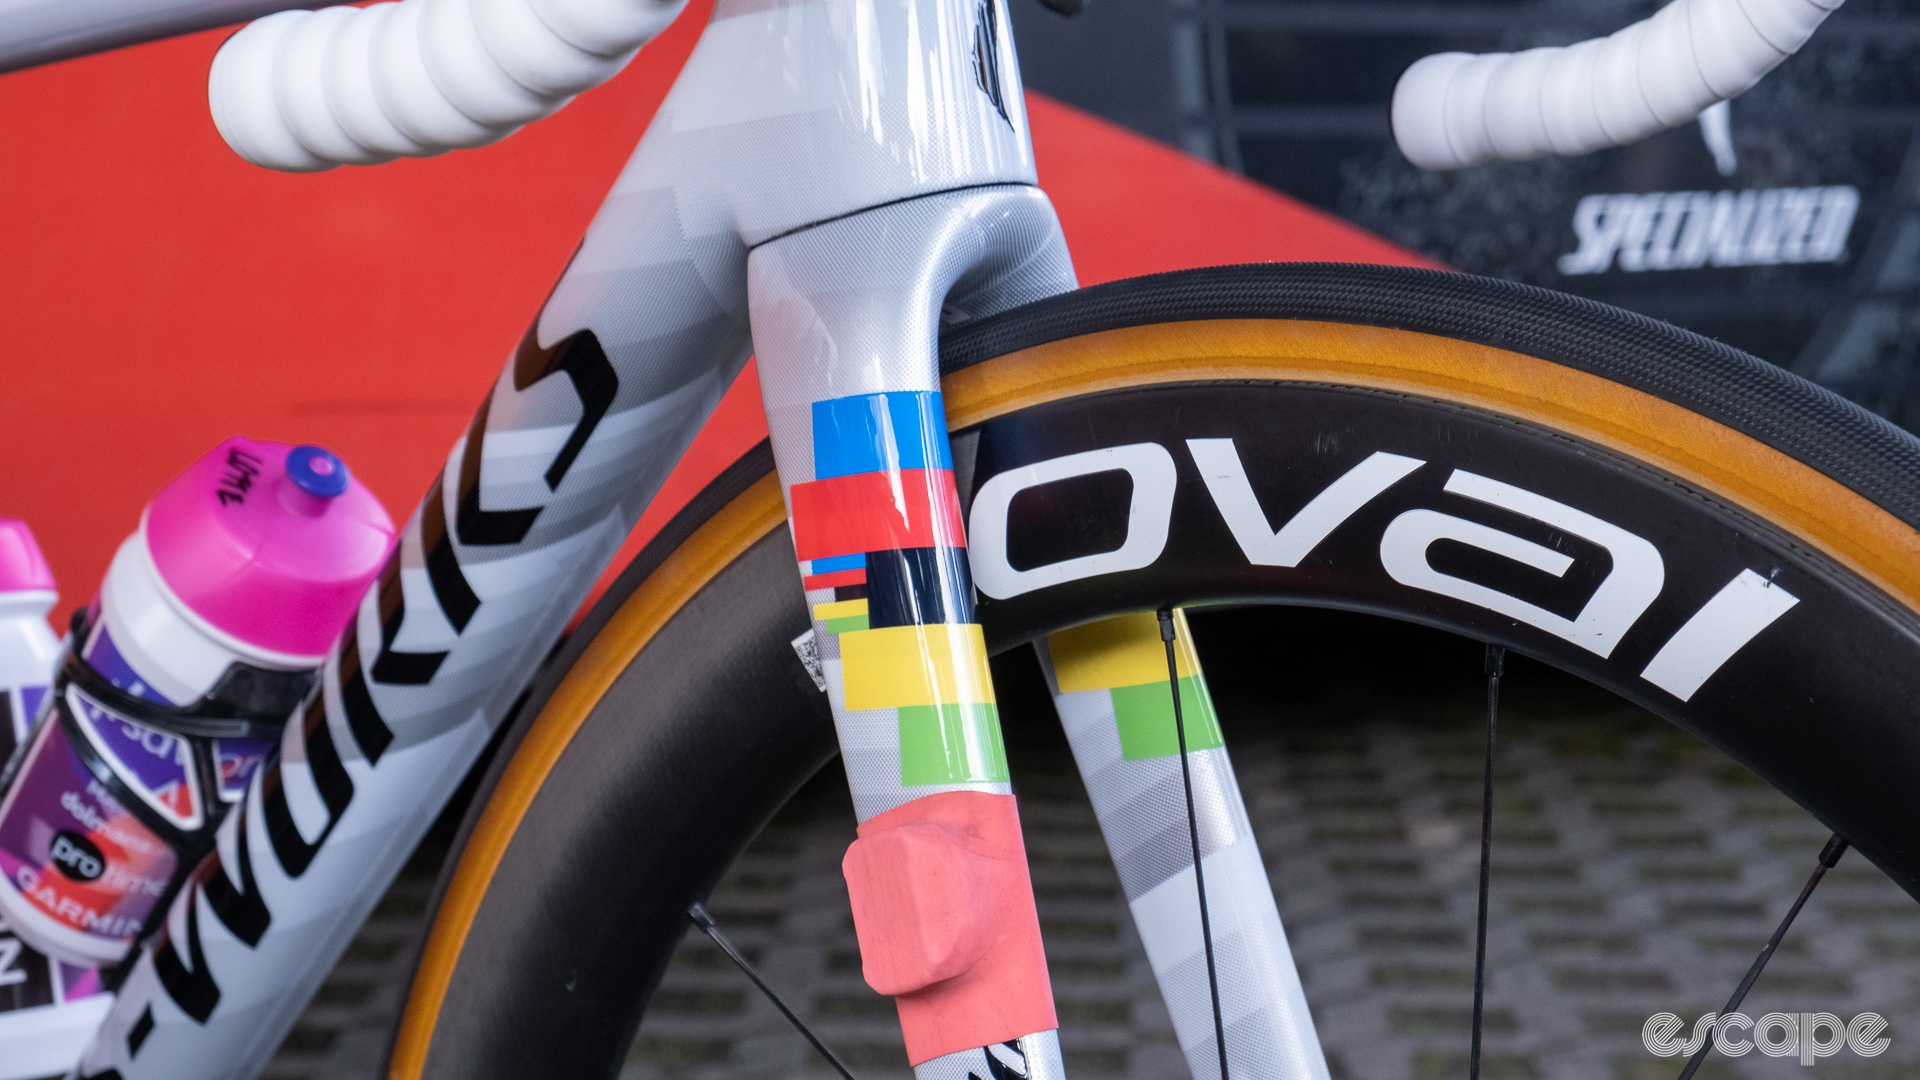 The image shows Kopecky's forks with a rainbow band decal and a timing chip held in place with a latex tube. Kopecky is also using Roval wheels as seen in the photo.